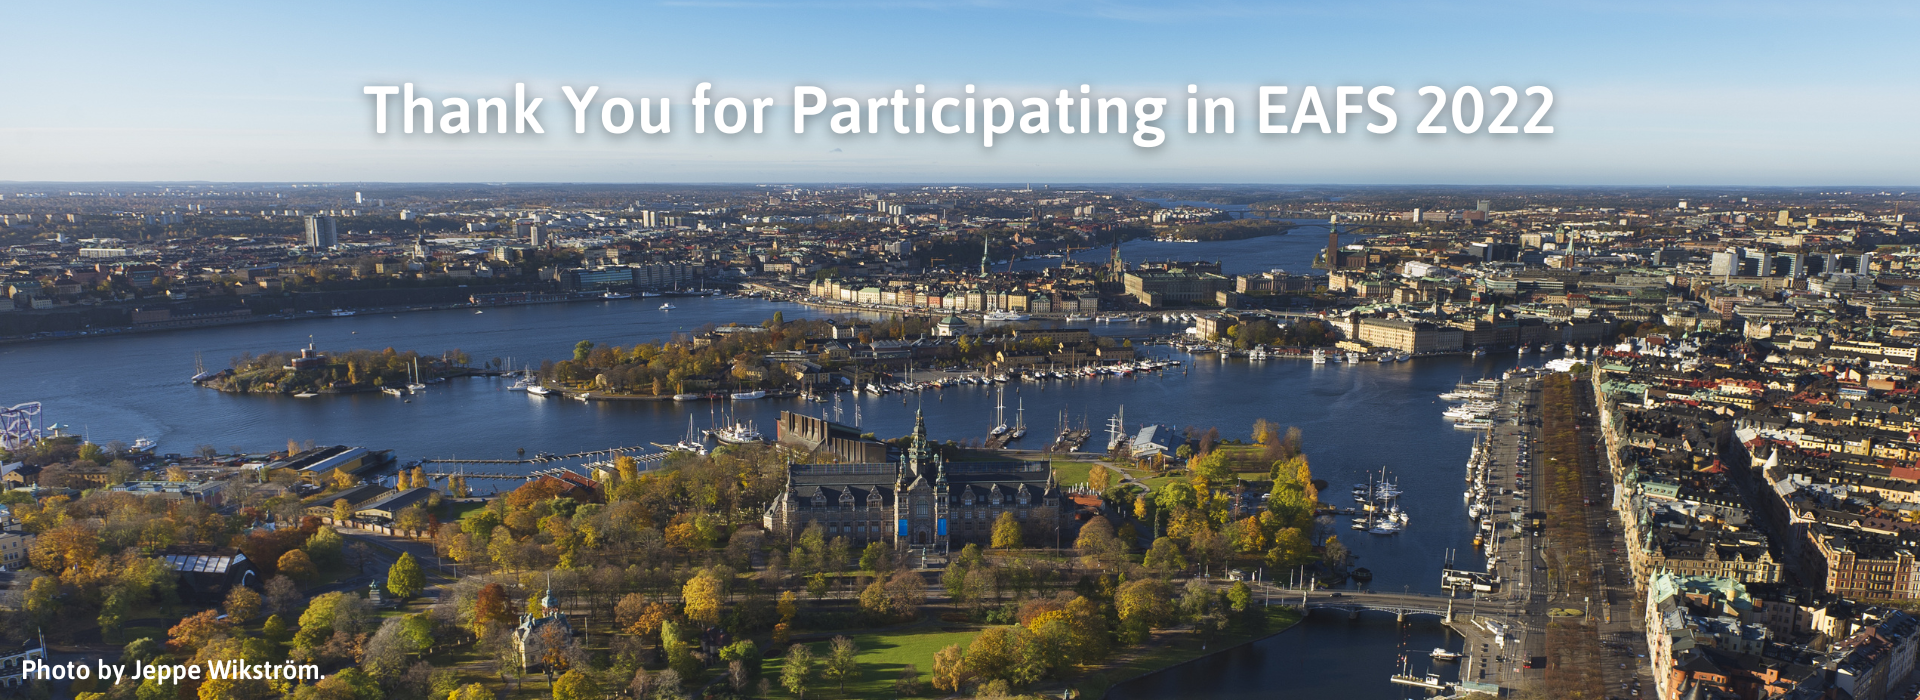 Thank You for Participating in EAFS 2022